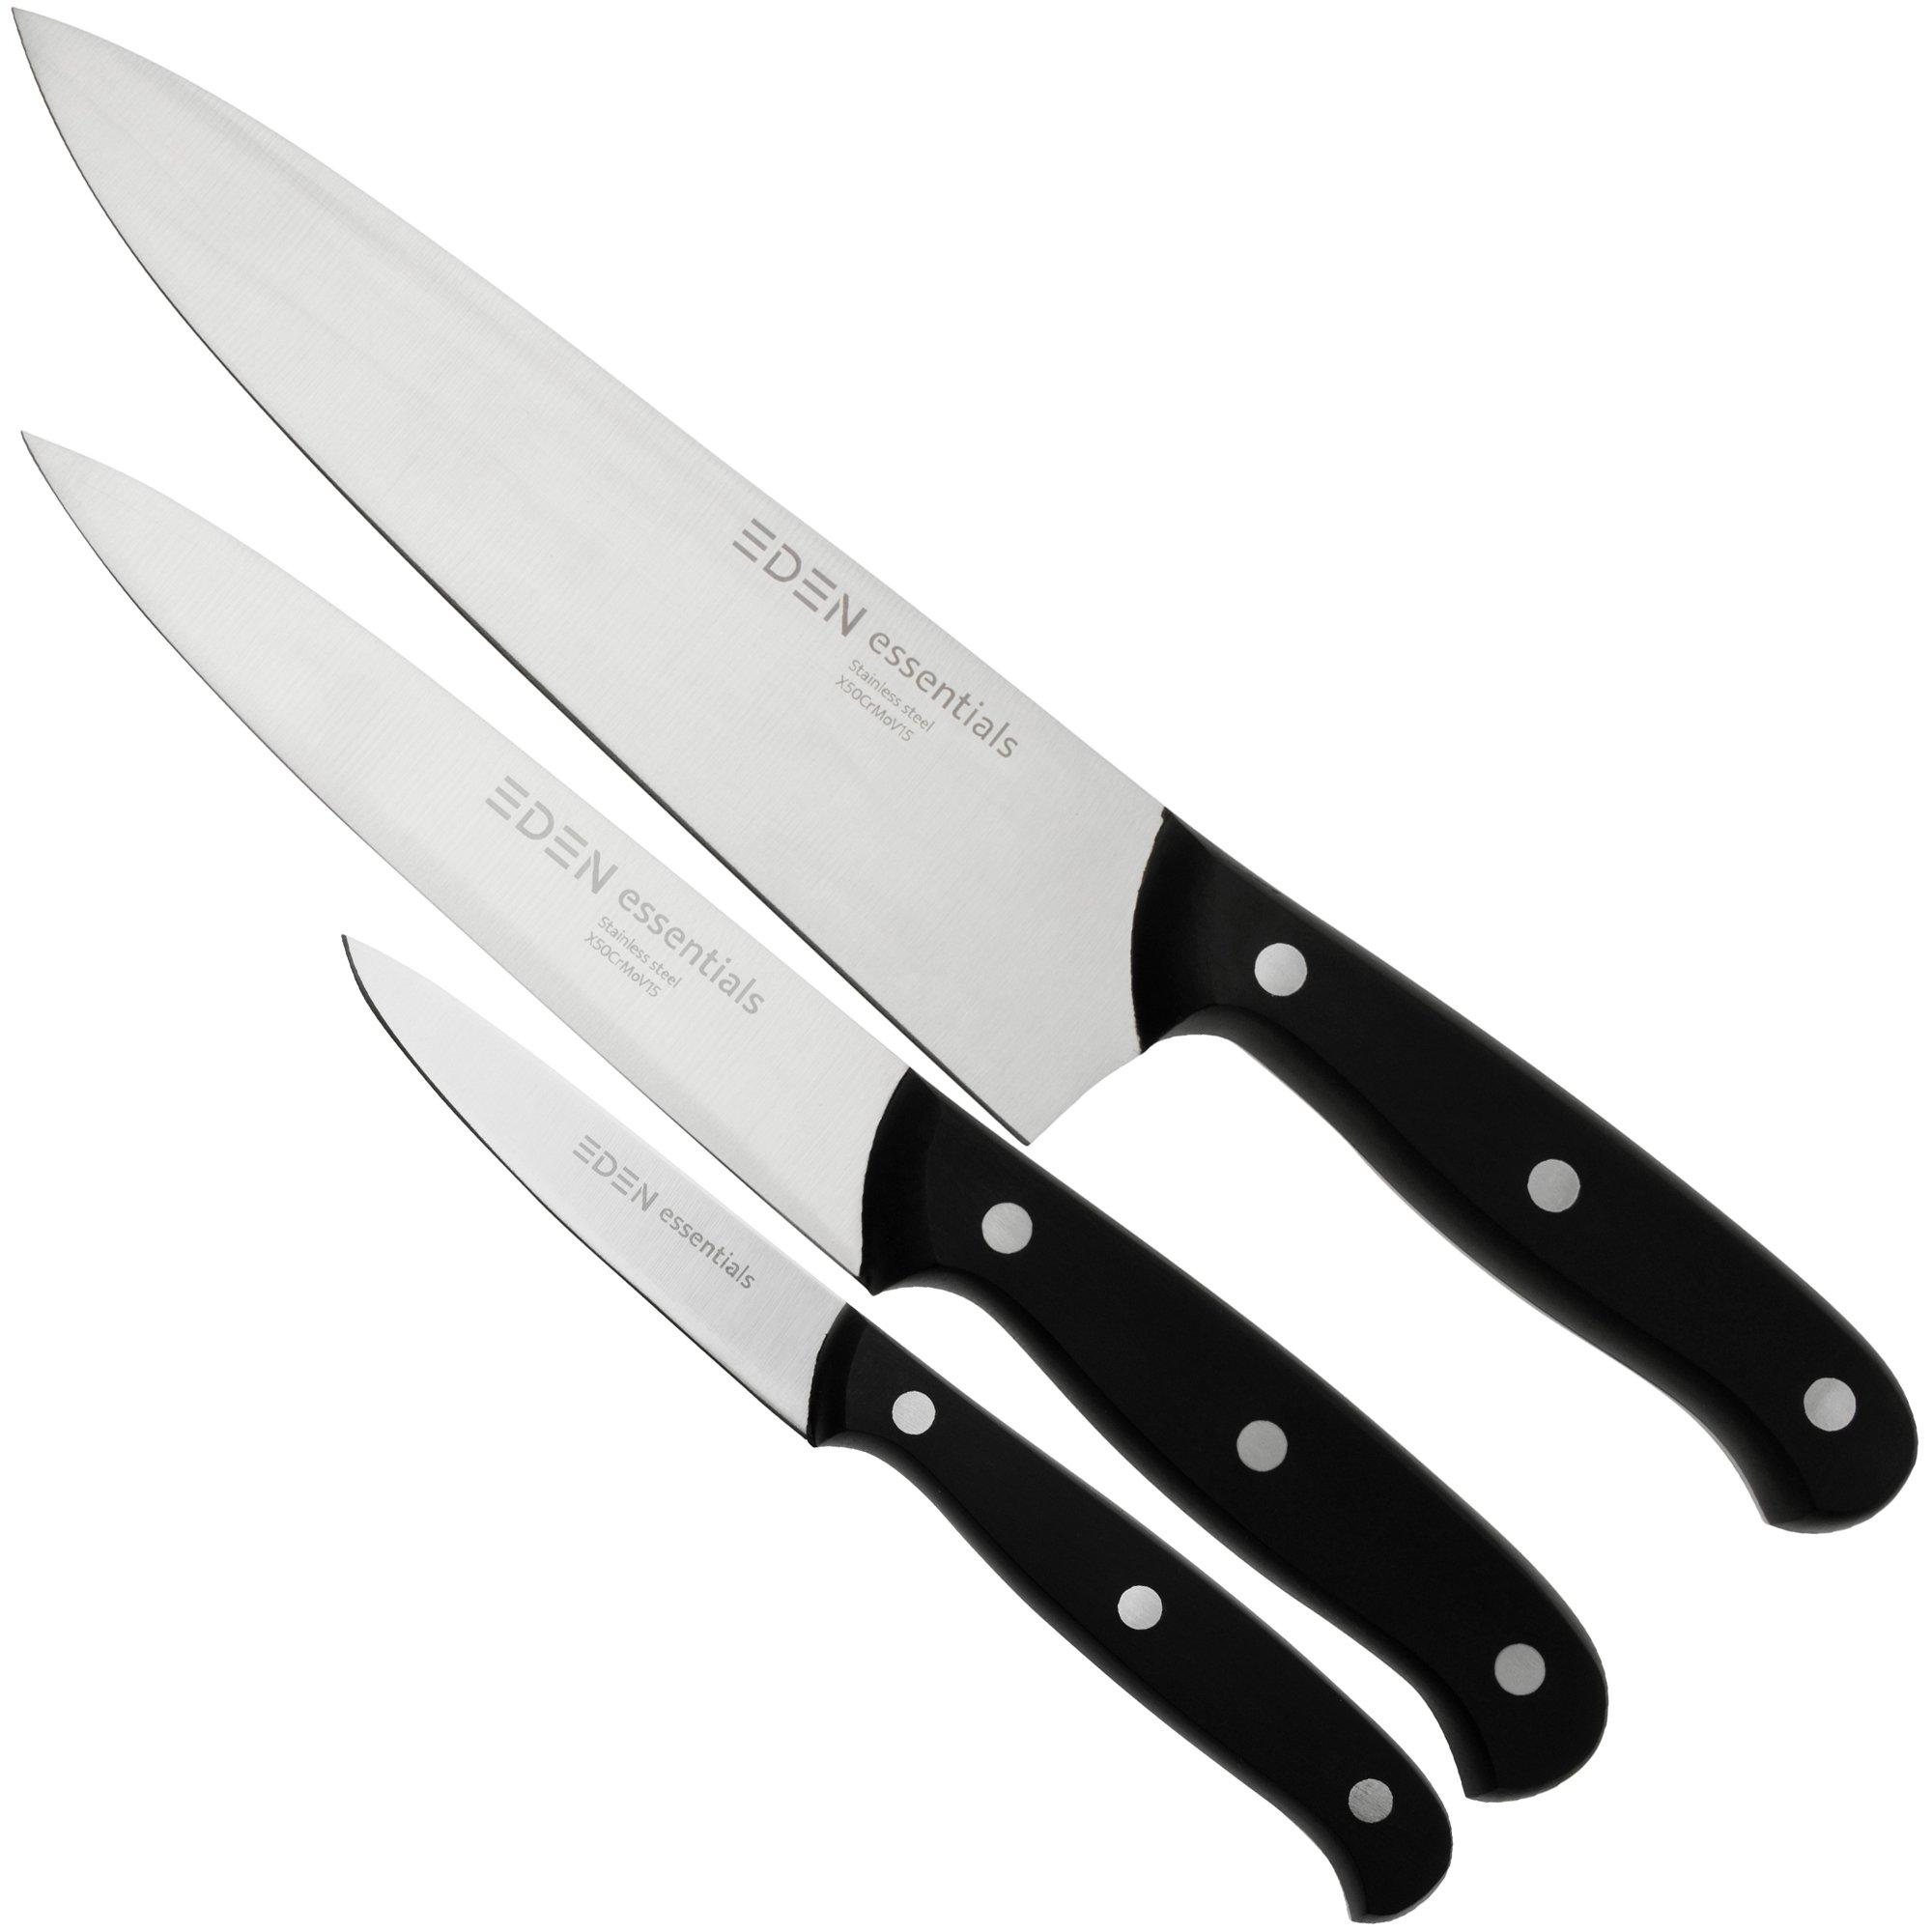 Nontron Traditional Set of 3 Kitchen knives, T3OFRBU 3-piece knife